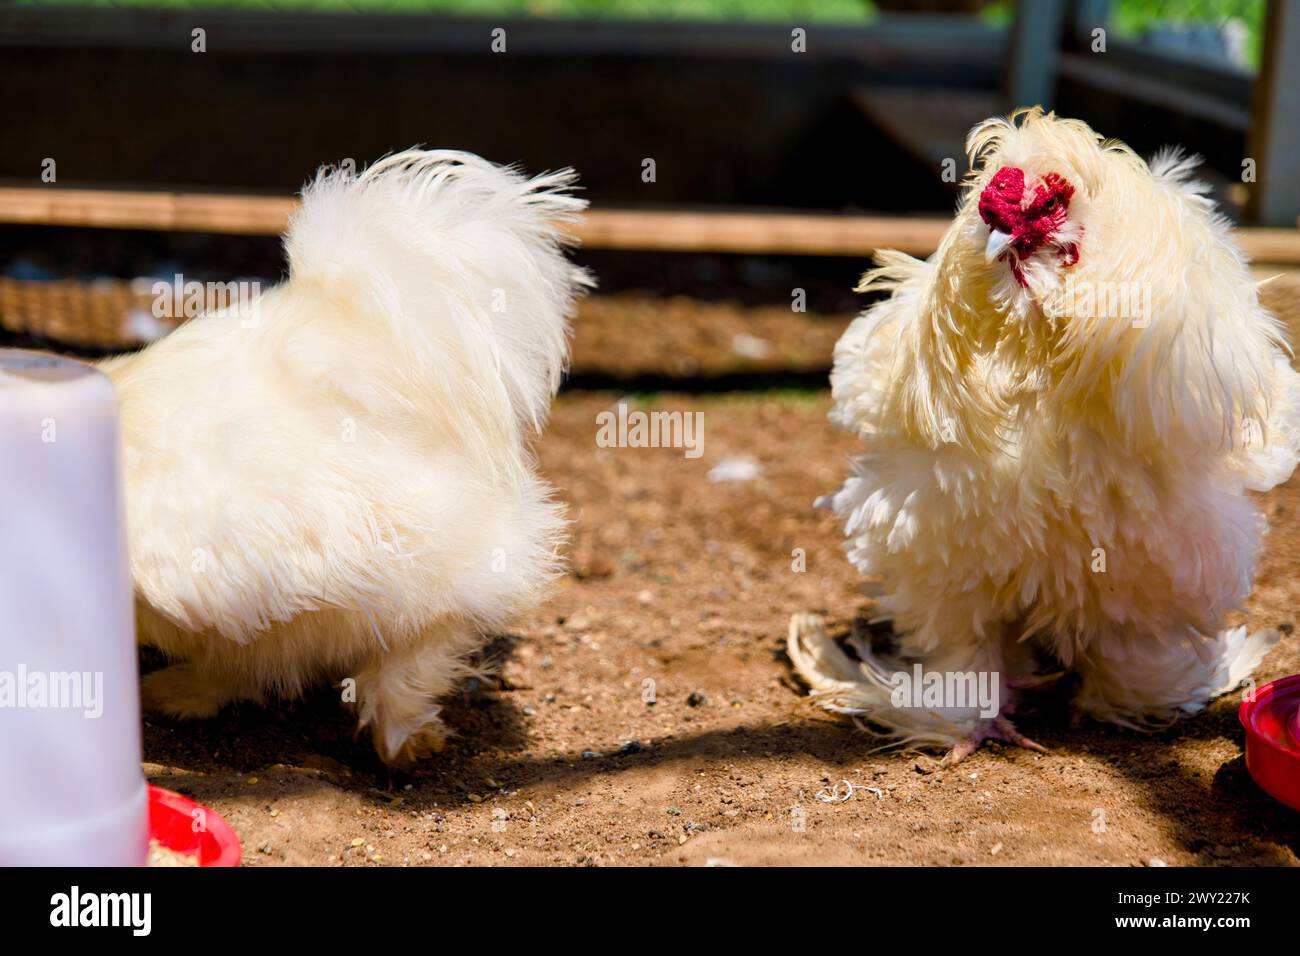 close-up photo of a beautiful white chicken with a blurred farm Stock Photo